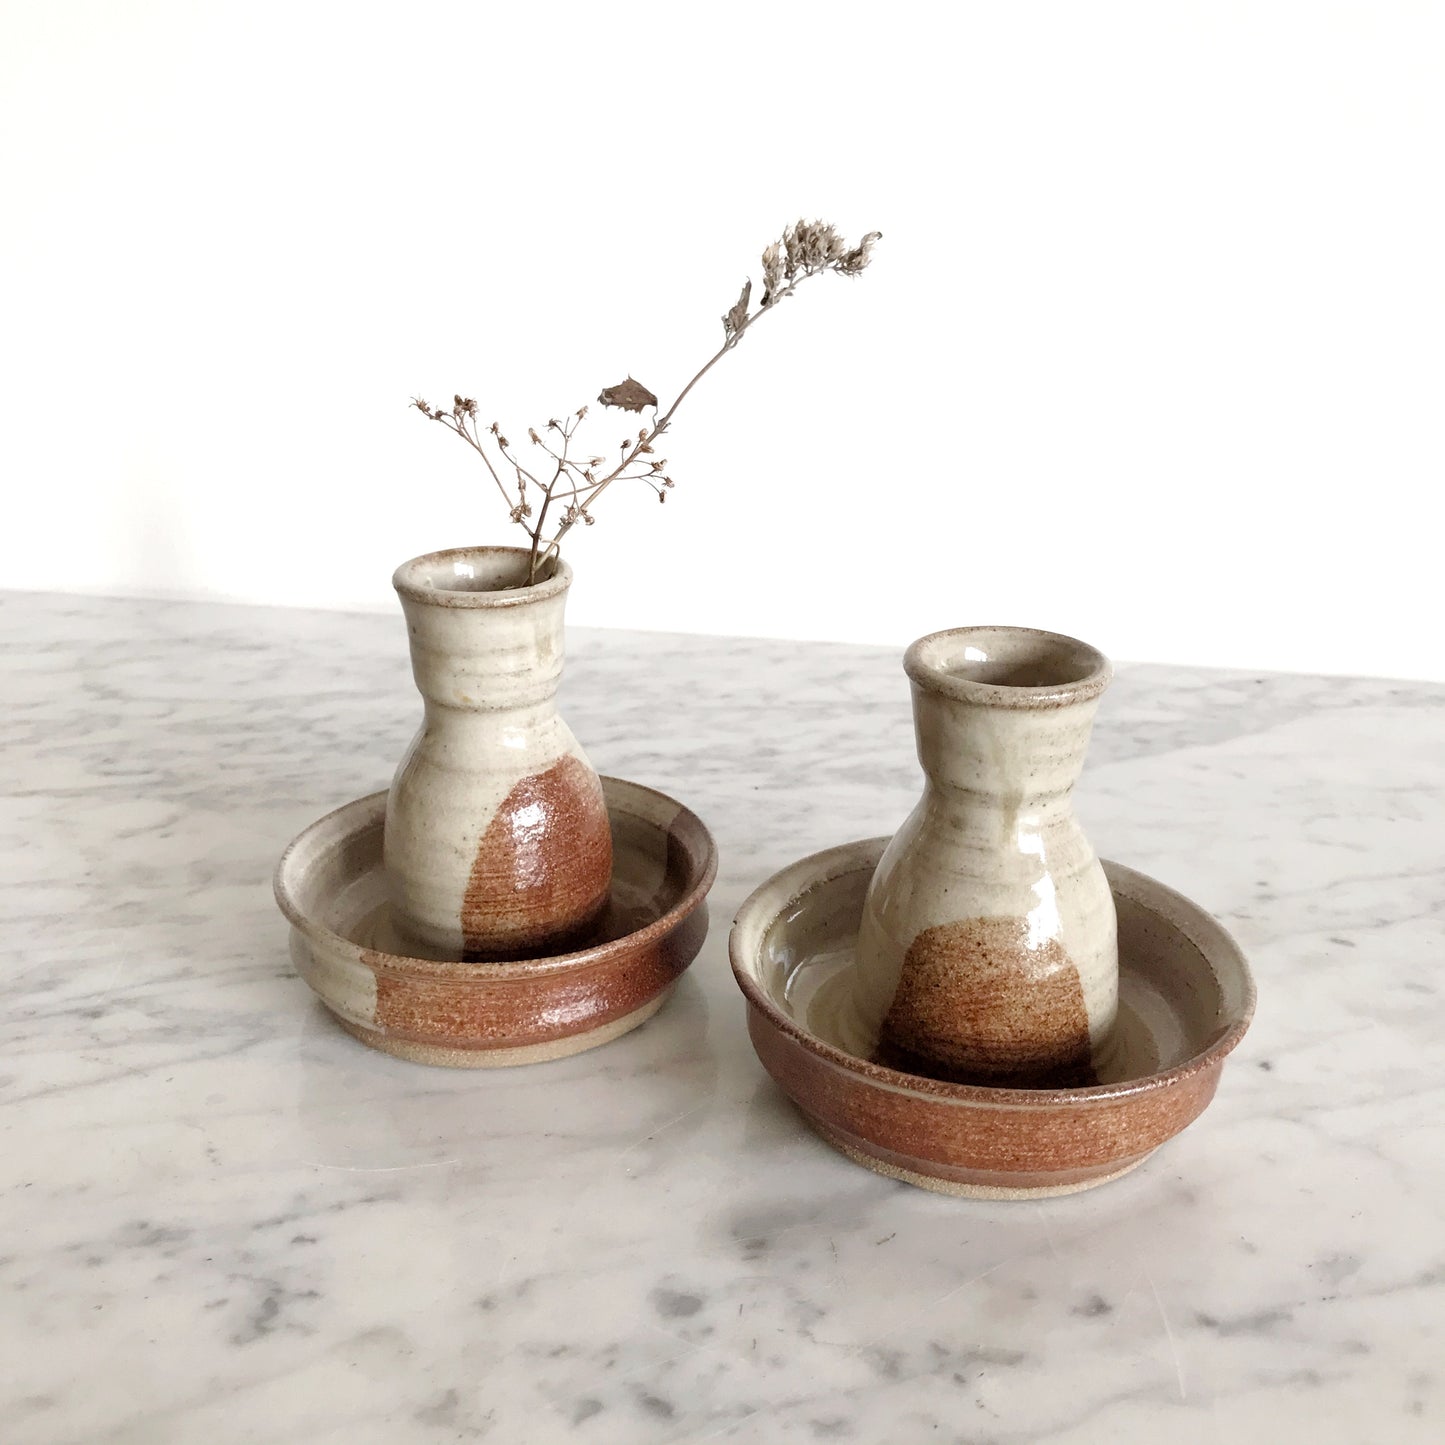 Pair of Vintage Stoneware Pottery Holders